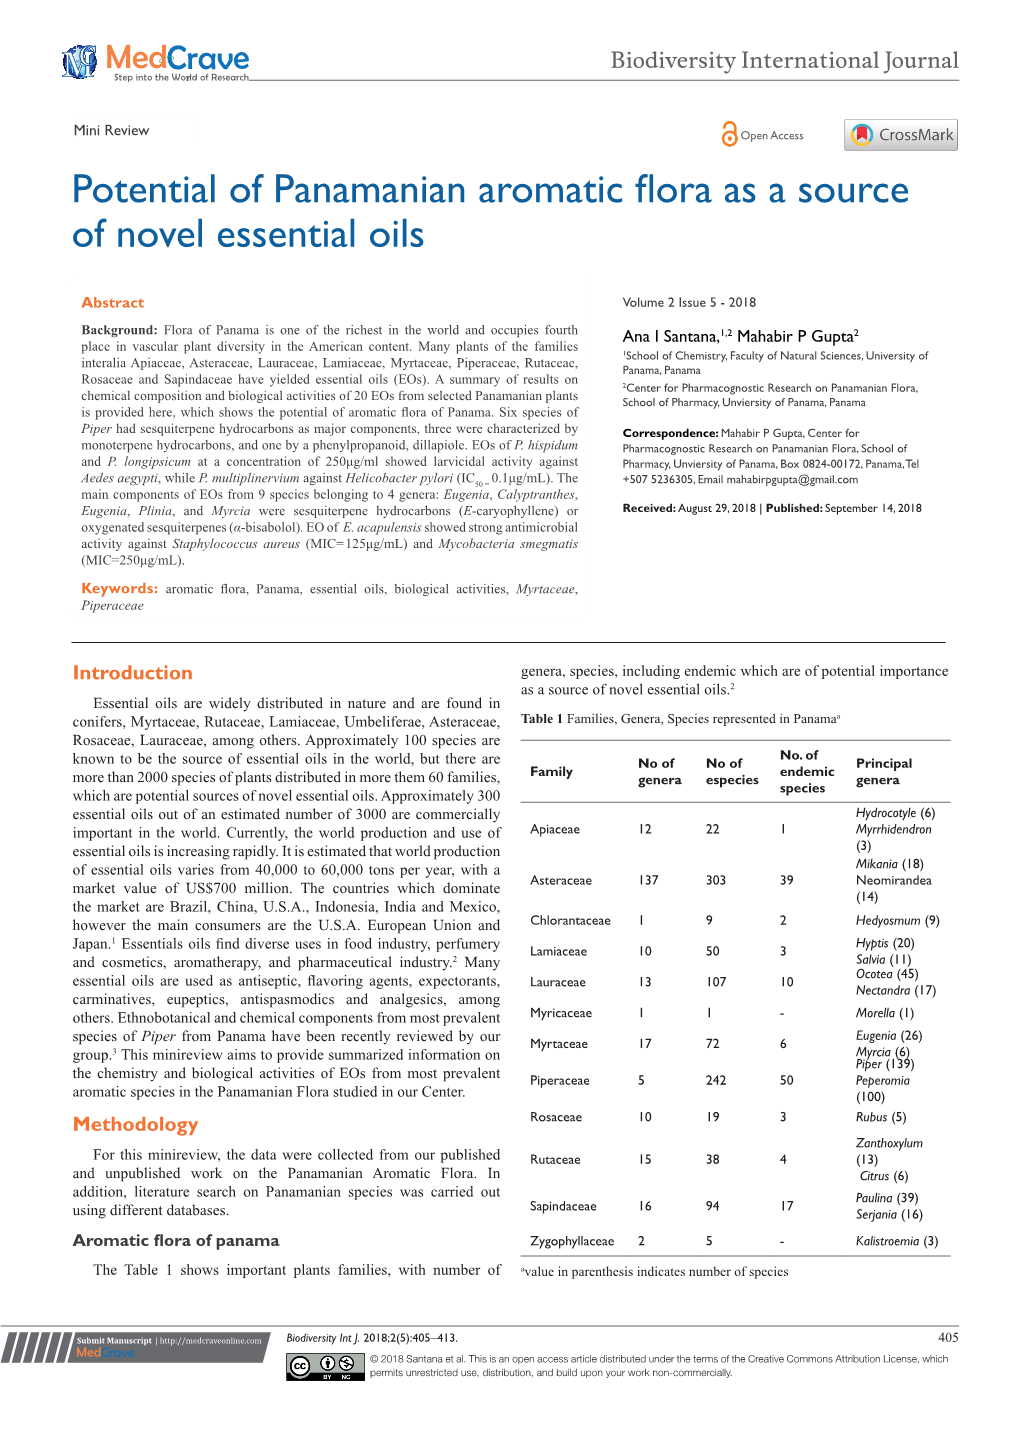 Potential of Panamanian Aromatic Flora As a Source of Novel Essential Oils